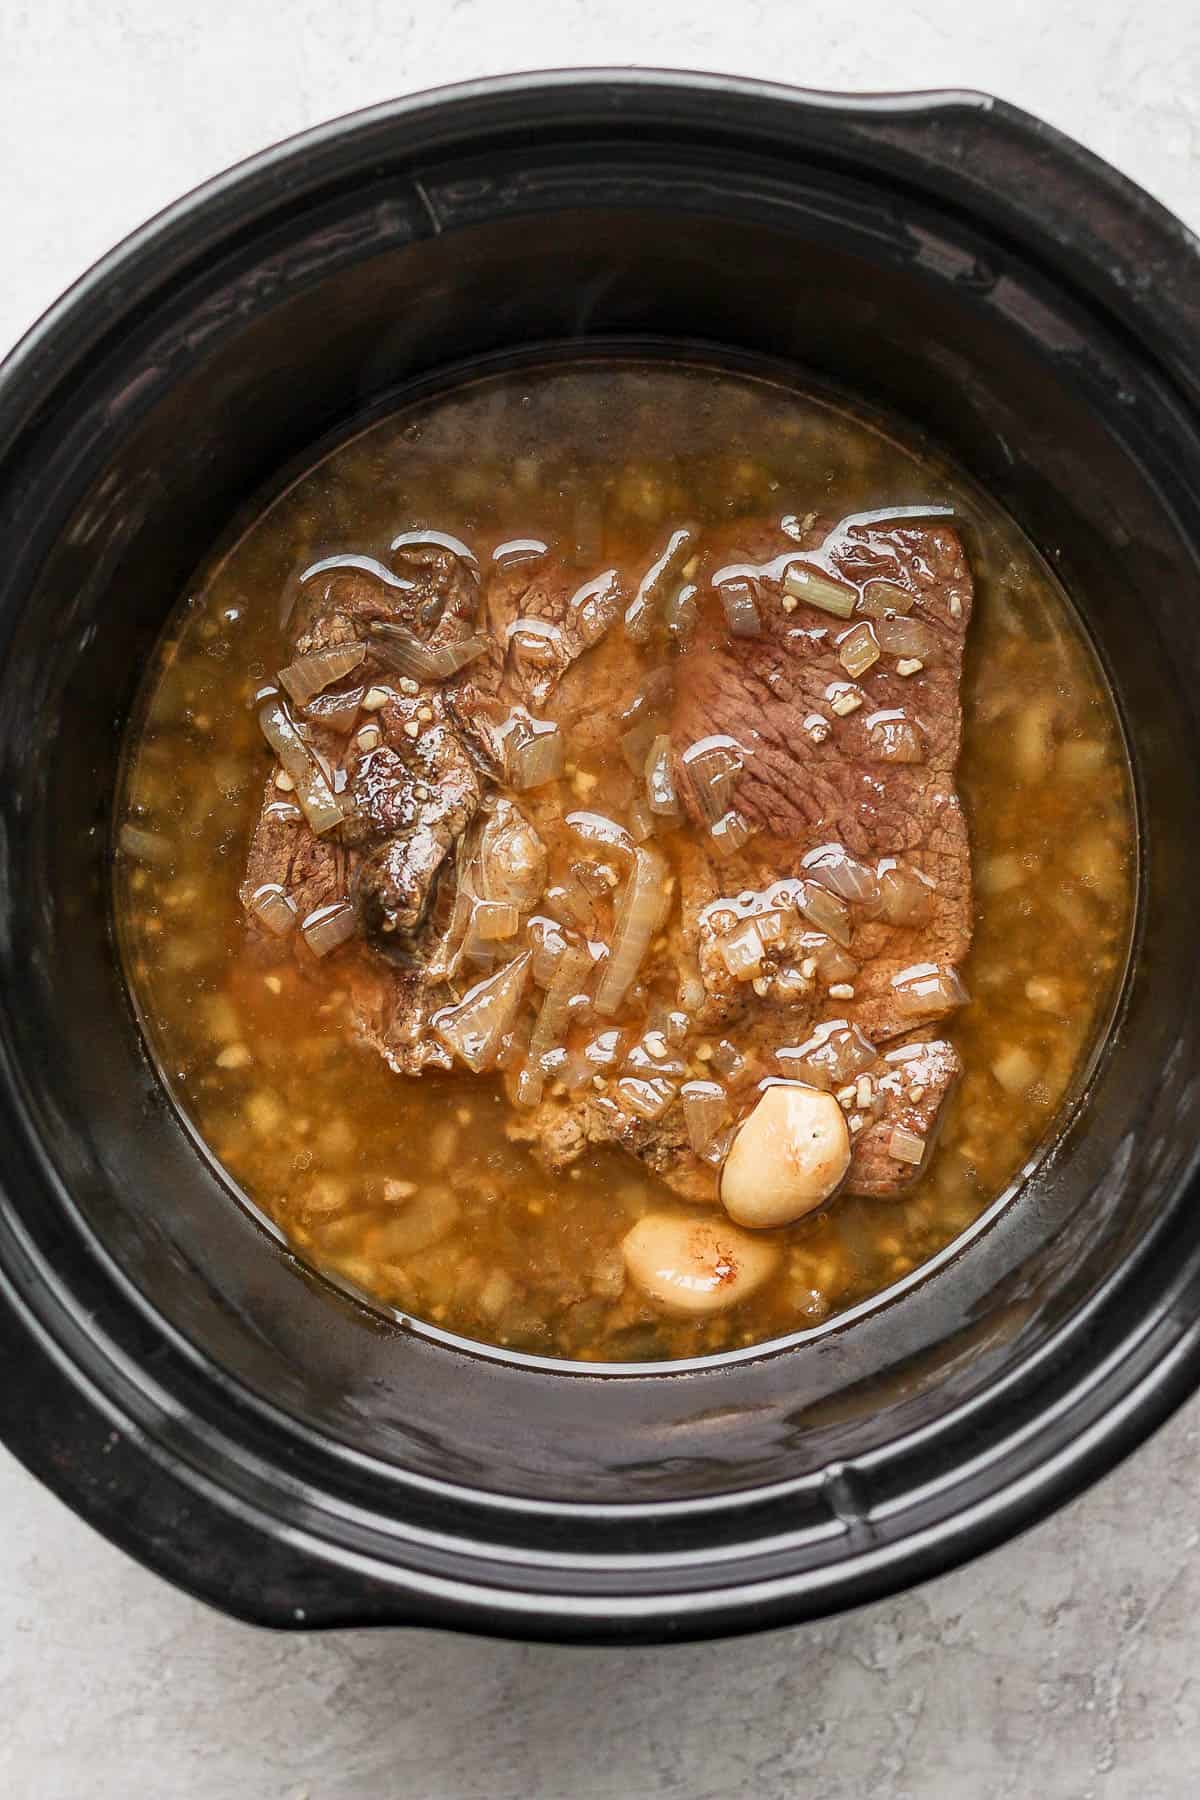 Everything in the slow cooker after cooking for 8 hours on low.